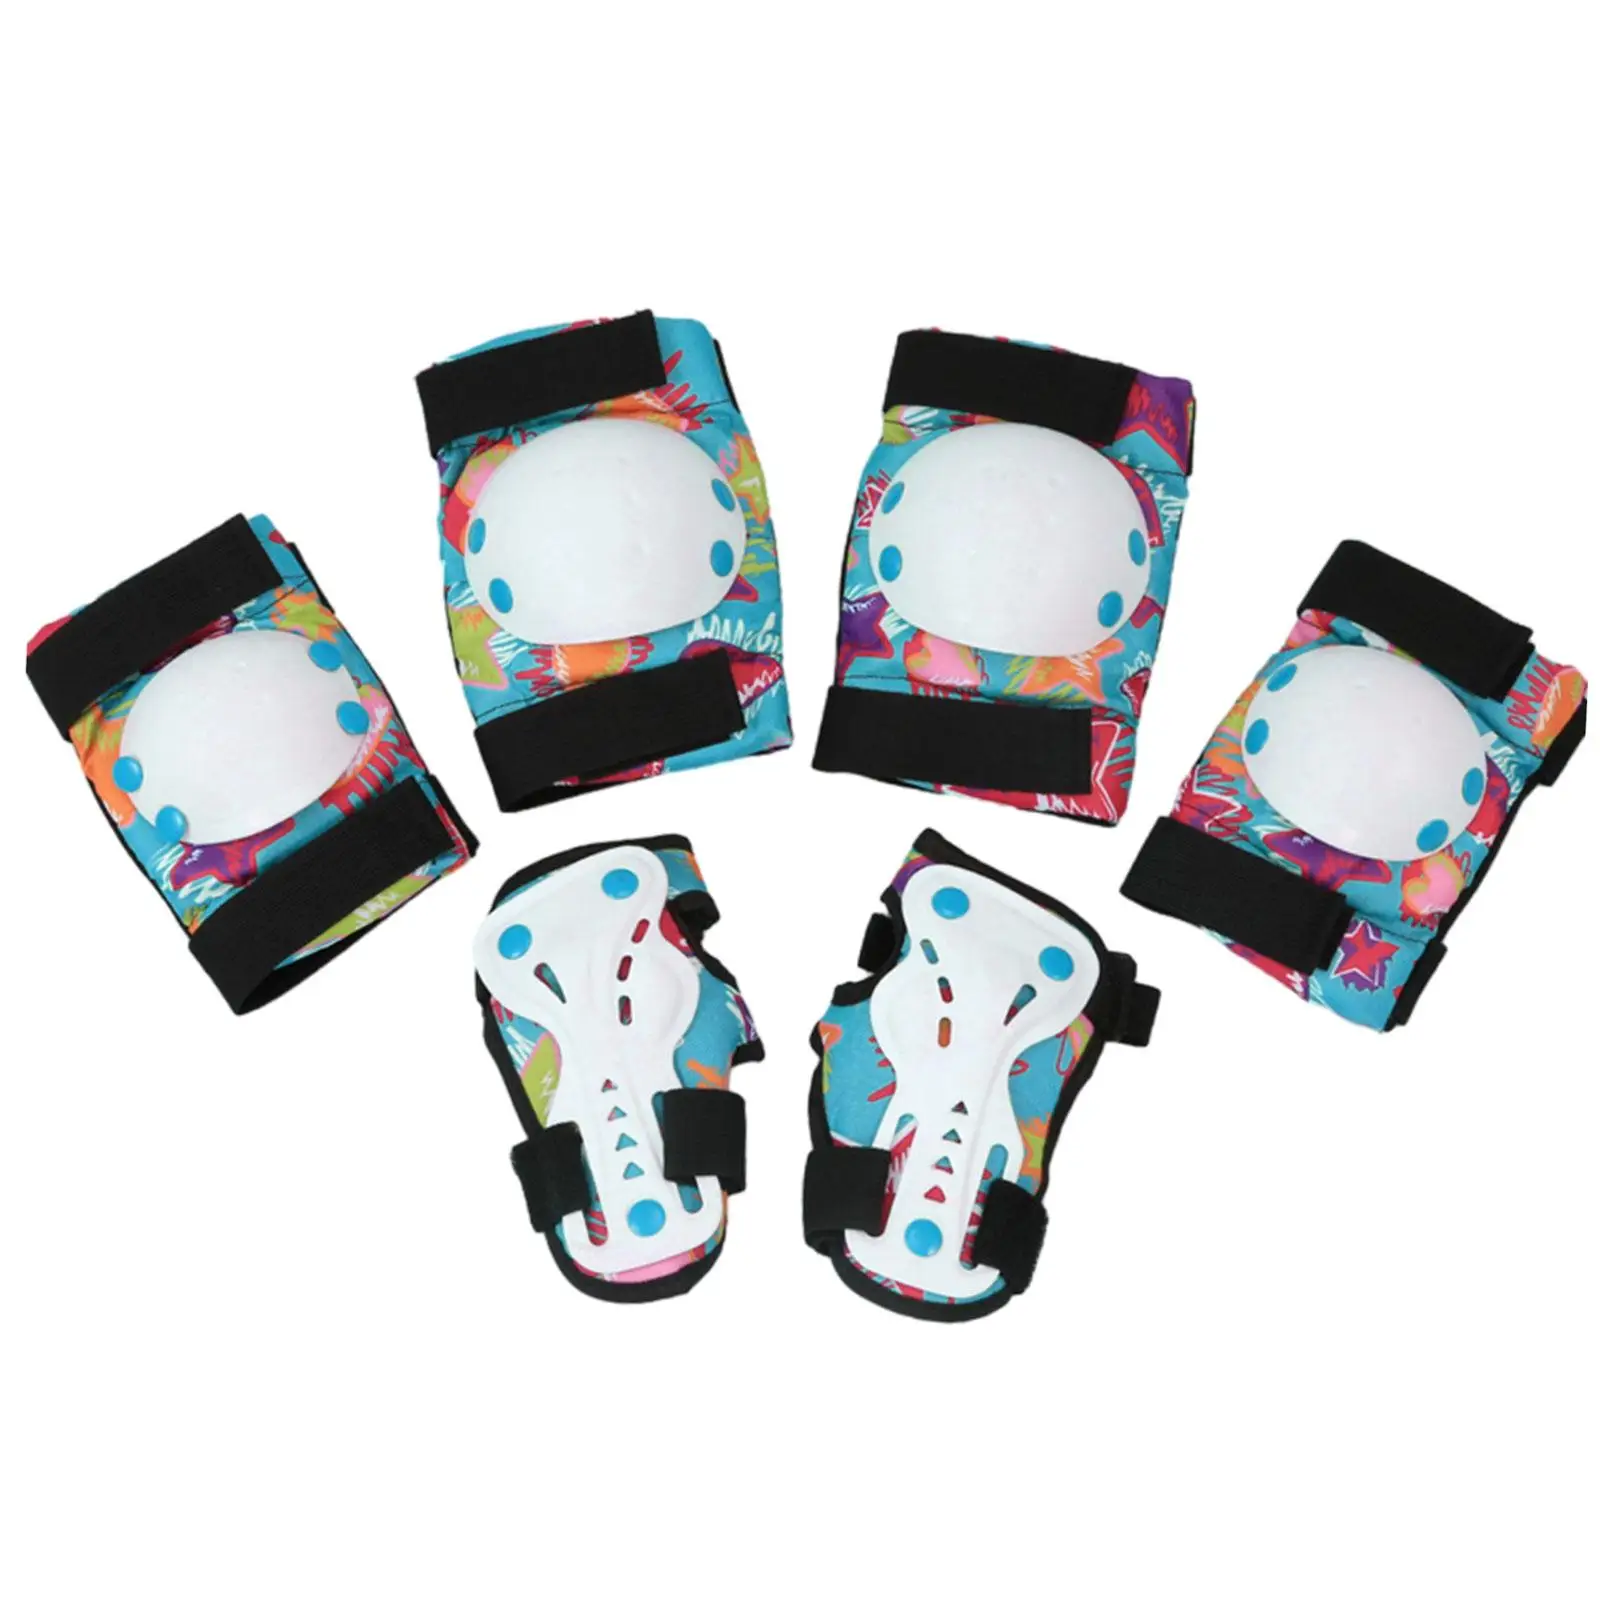 Knee Pads Elbow Wrist Pads Boys Girls Children Protective Gear Set for Roller Skating Skateboard Exercise Bike Outdoor Sports